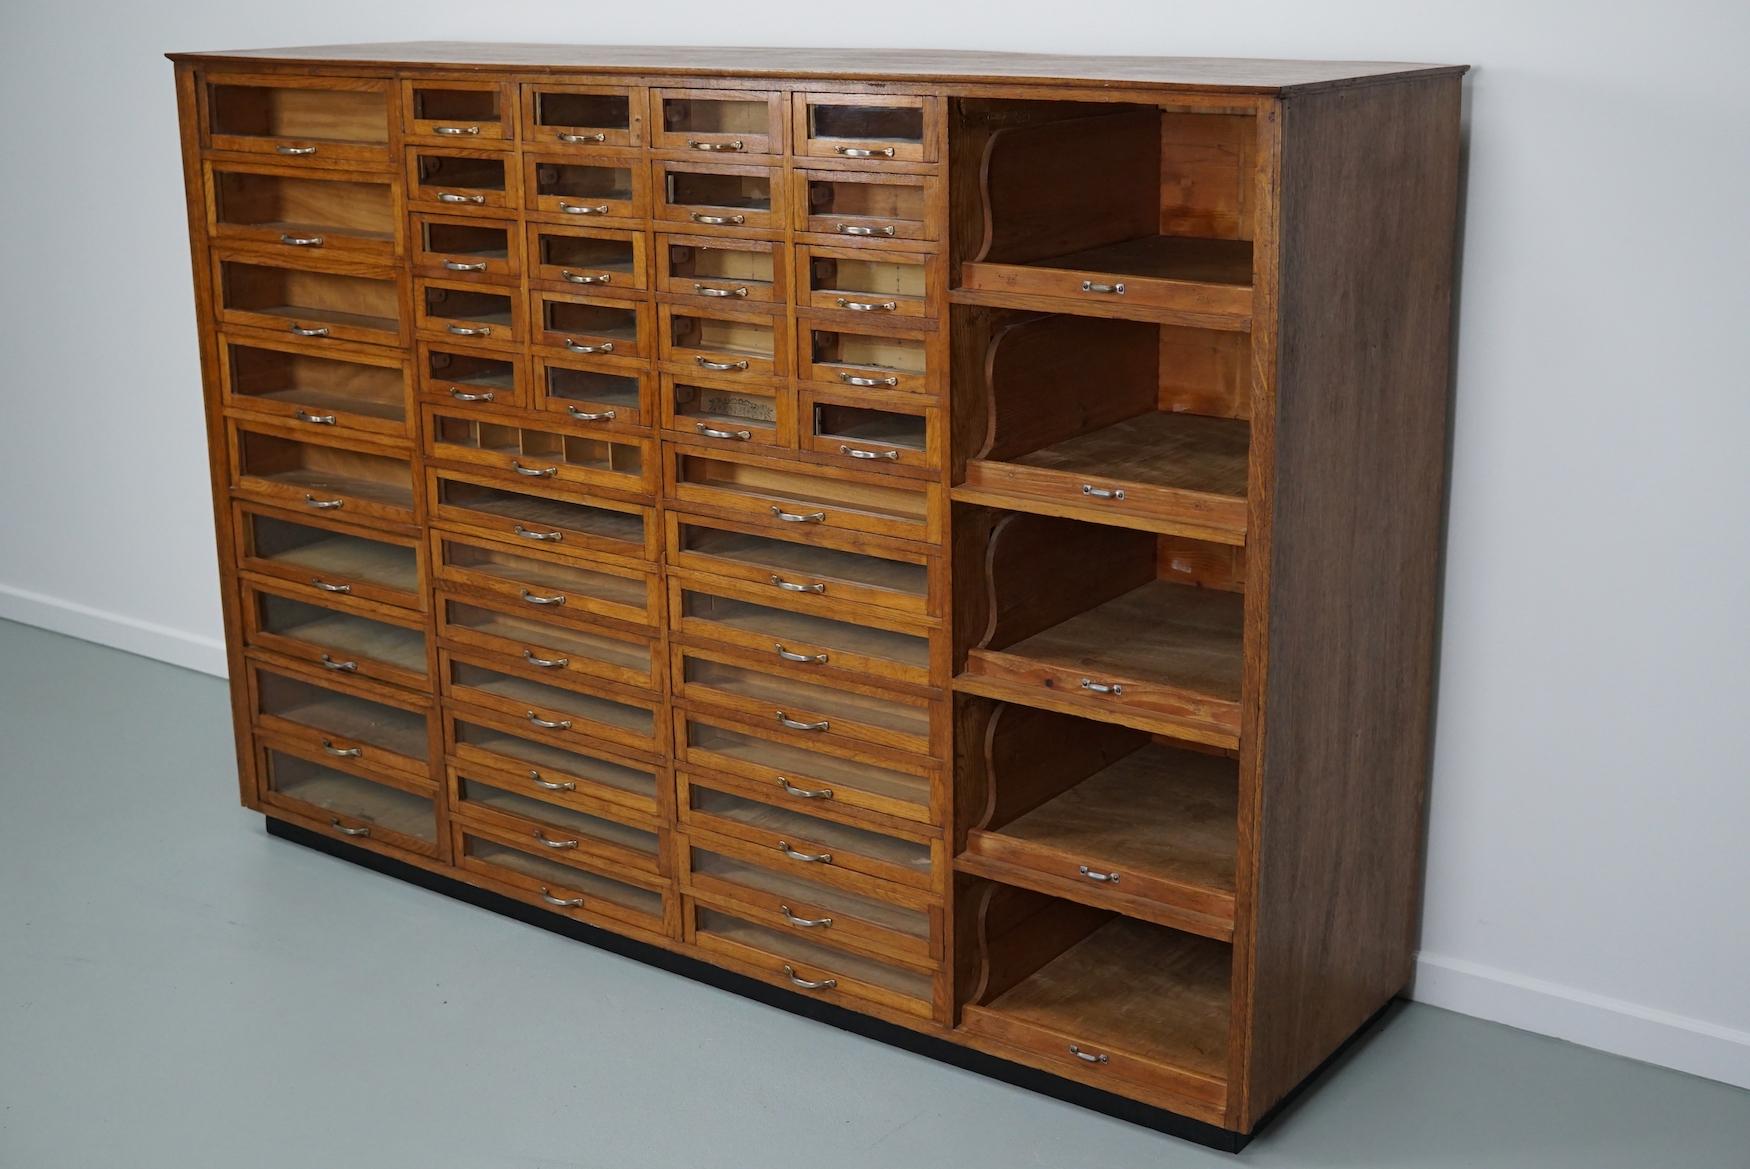 This haberdashery cabinet was produced during the 1930s in the Netherlands. It features many drawers in oak with glass fronts and metal handles. It was originally used in the department store Maussen in the city of Maastricht which was closed in